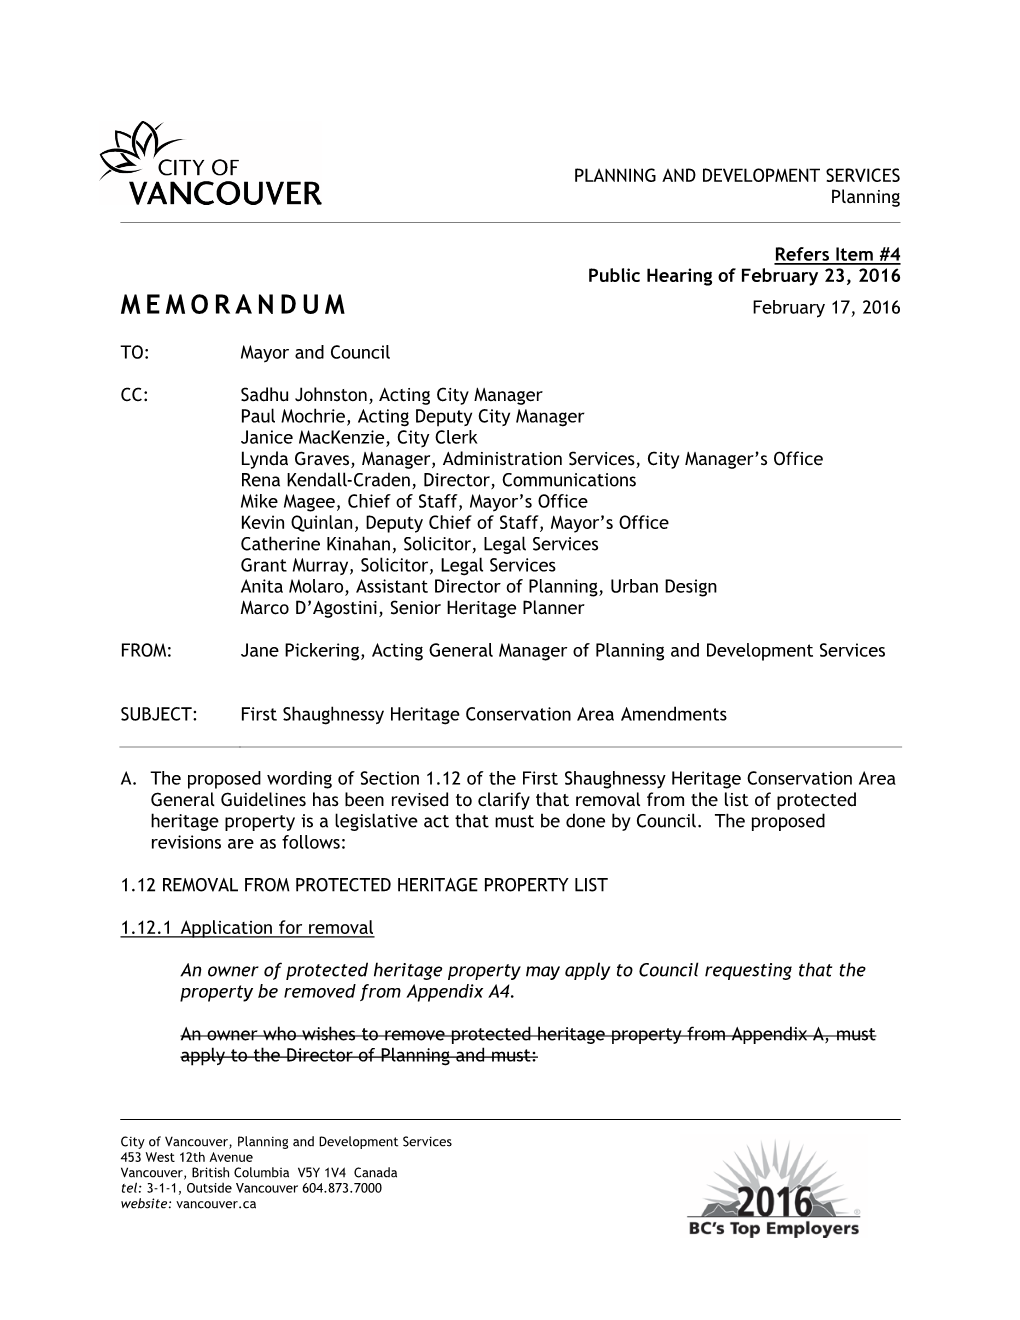 First Shaughnessy Heritage Conservation Area Amendments